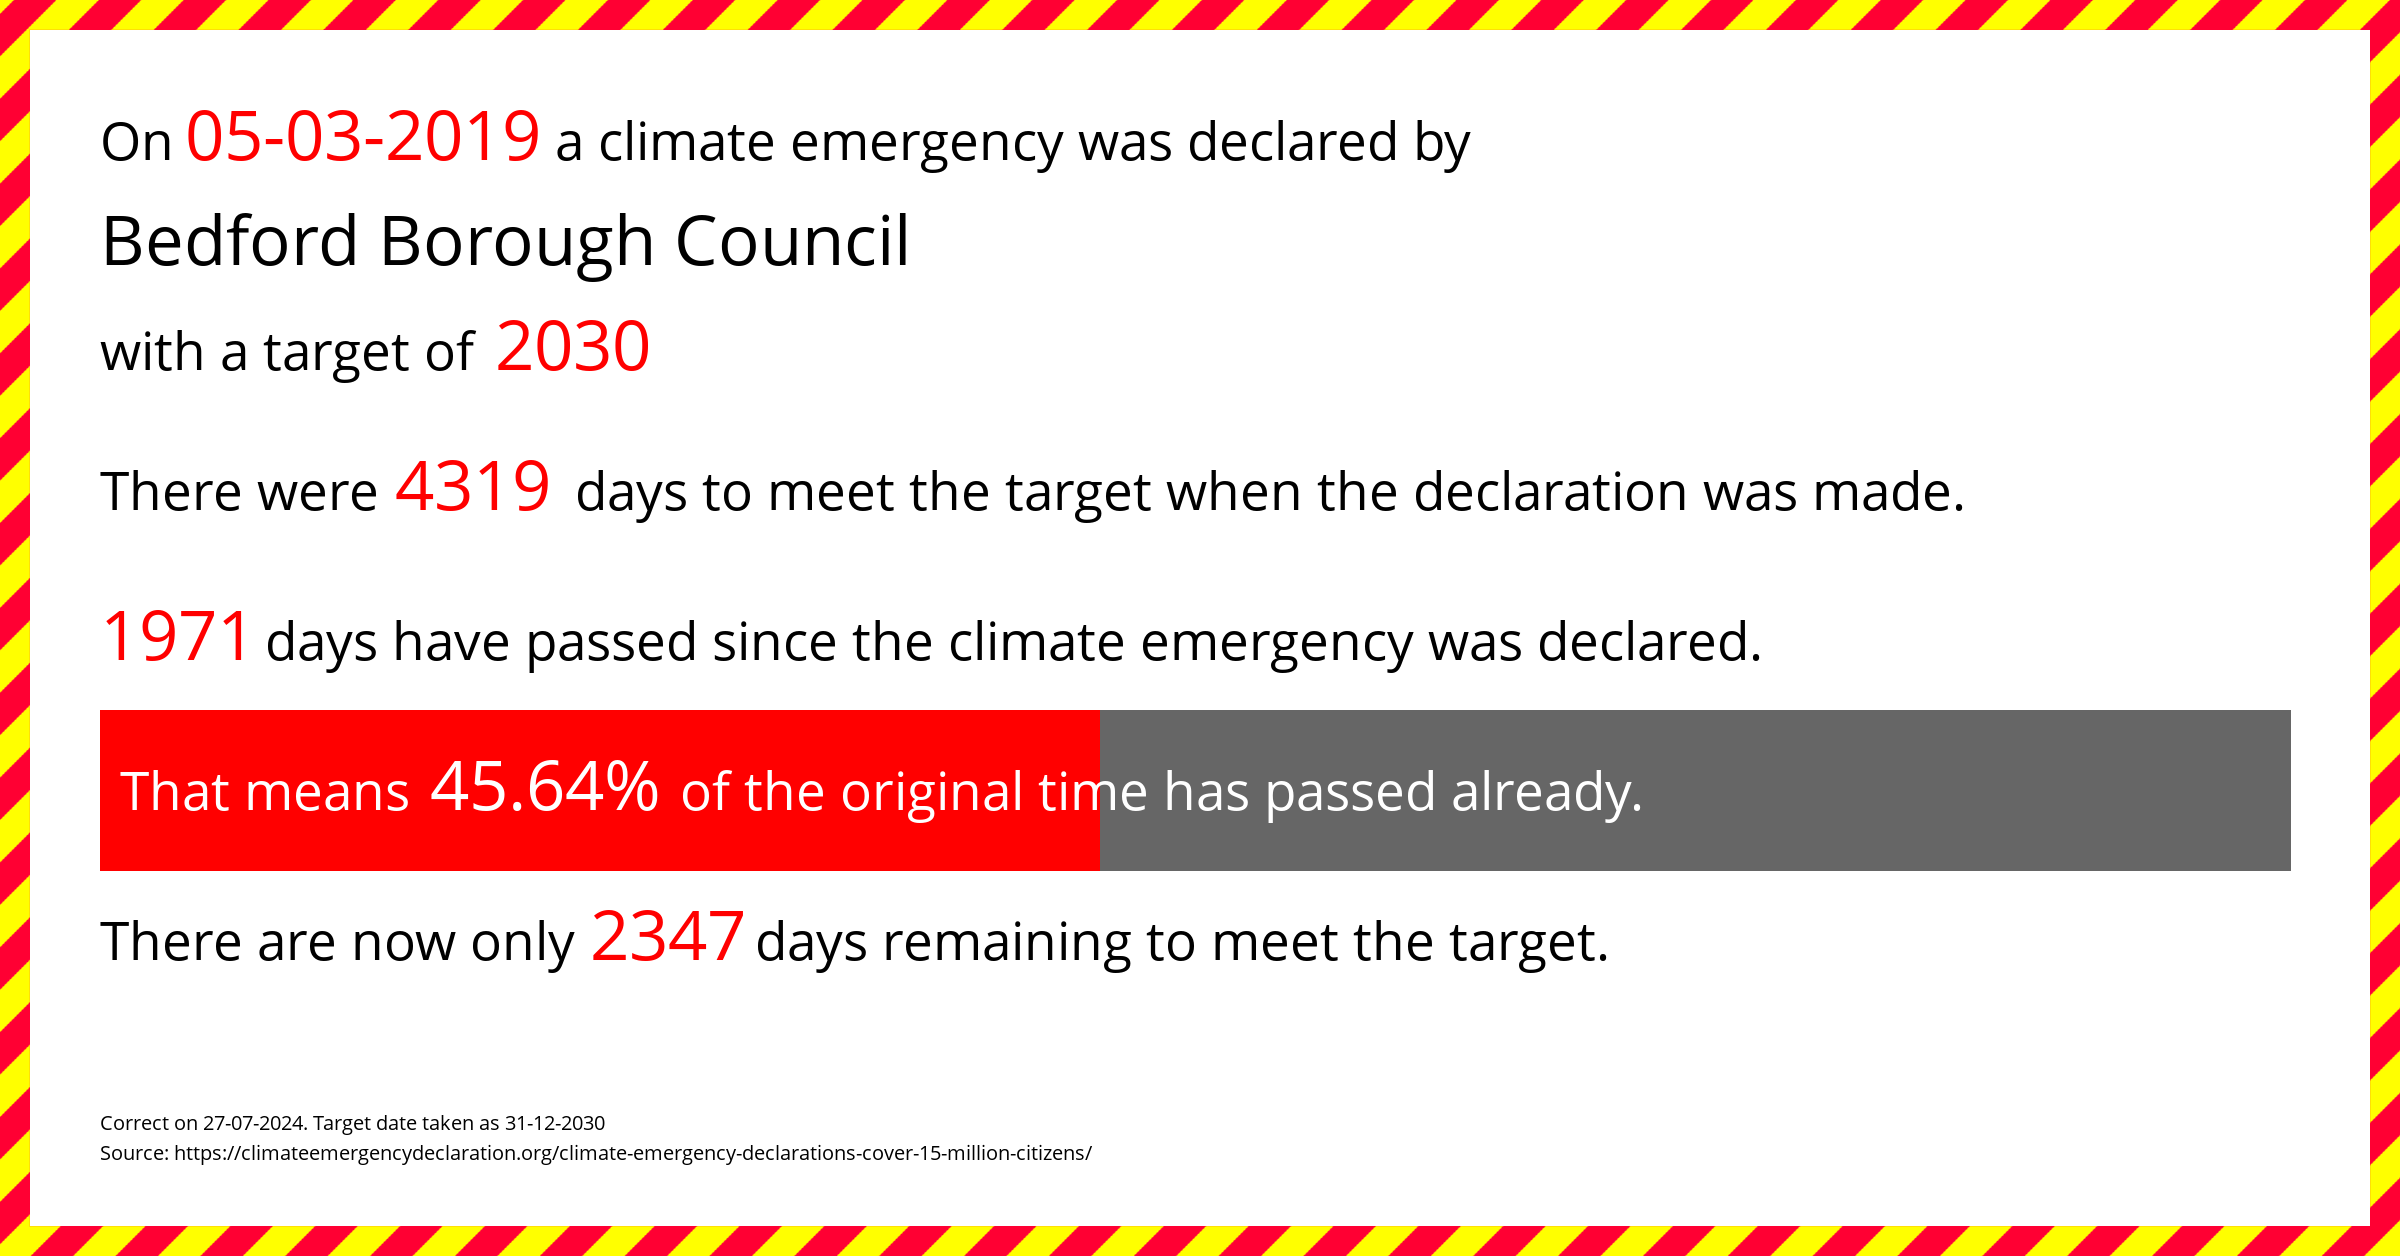 Bedford Borough Council declared a Climate emergency on Tuesday 5th March 2019, with a target of 2030.